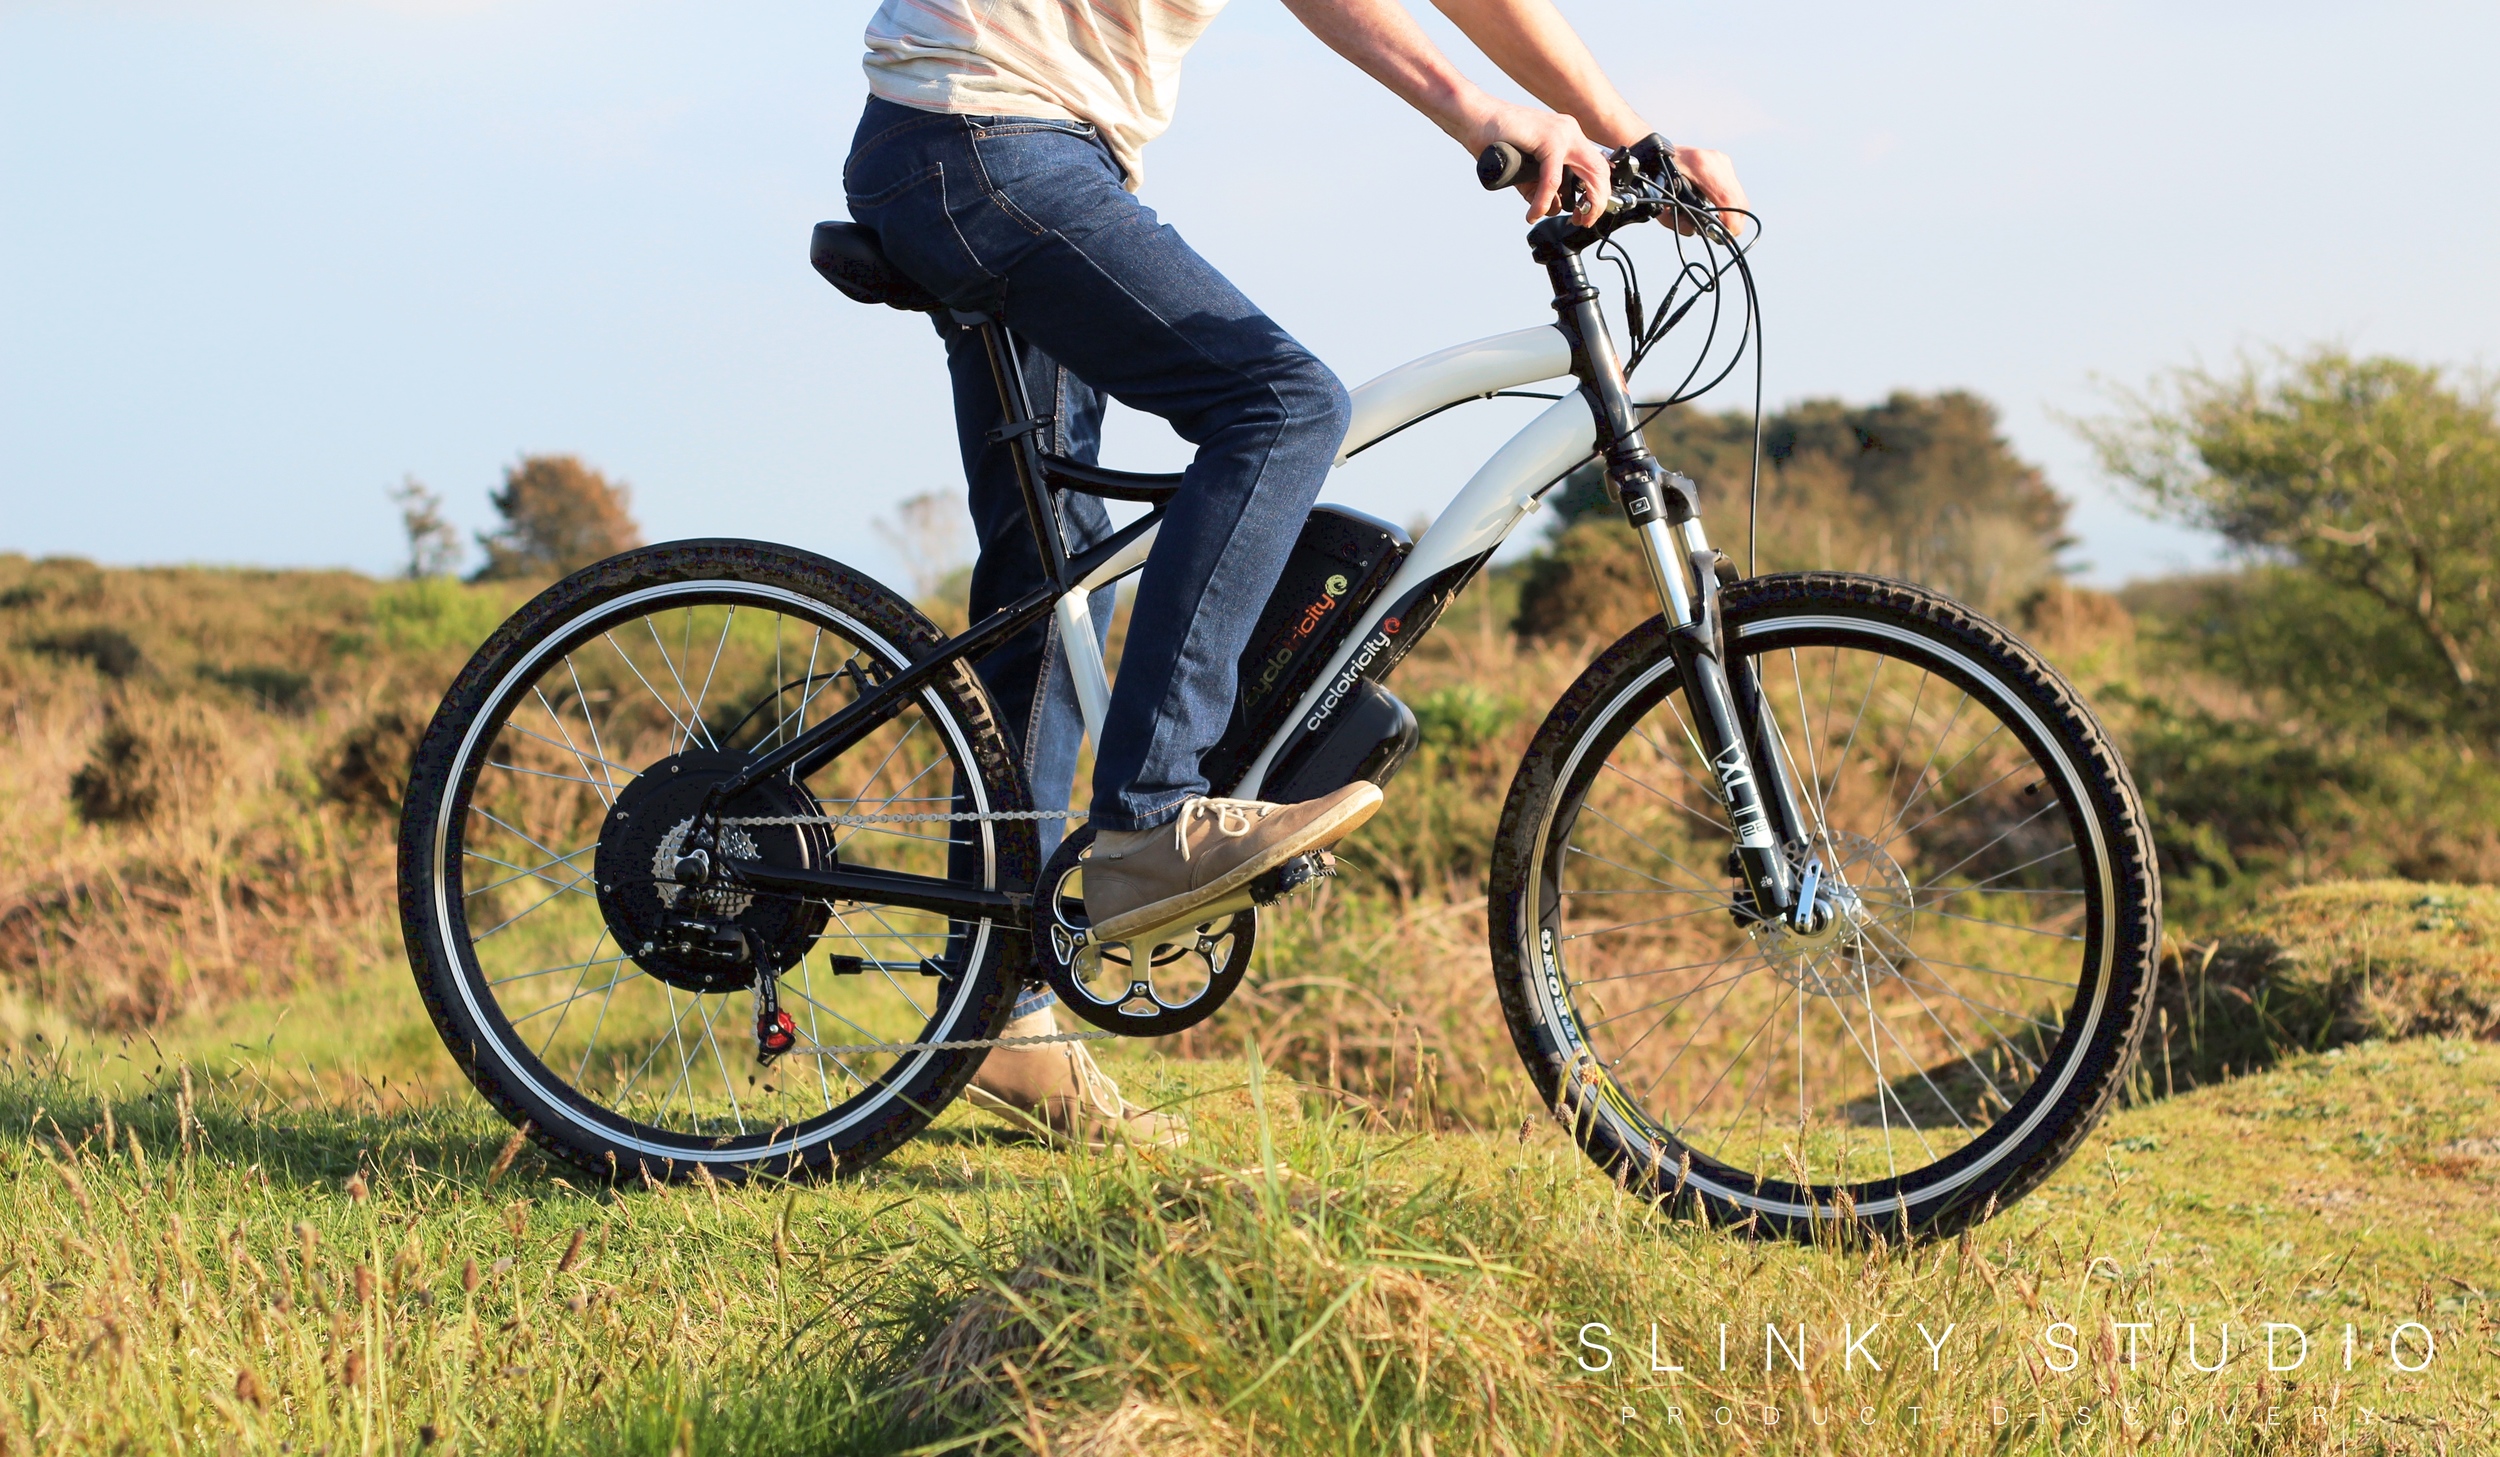 Cyclotricity Stealth eBike Riding Side View Cornwall.jpg